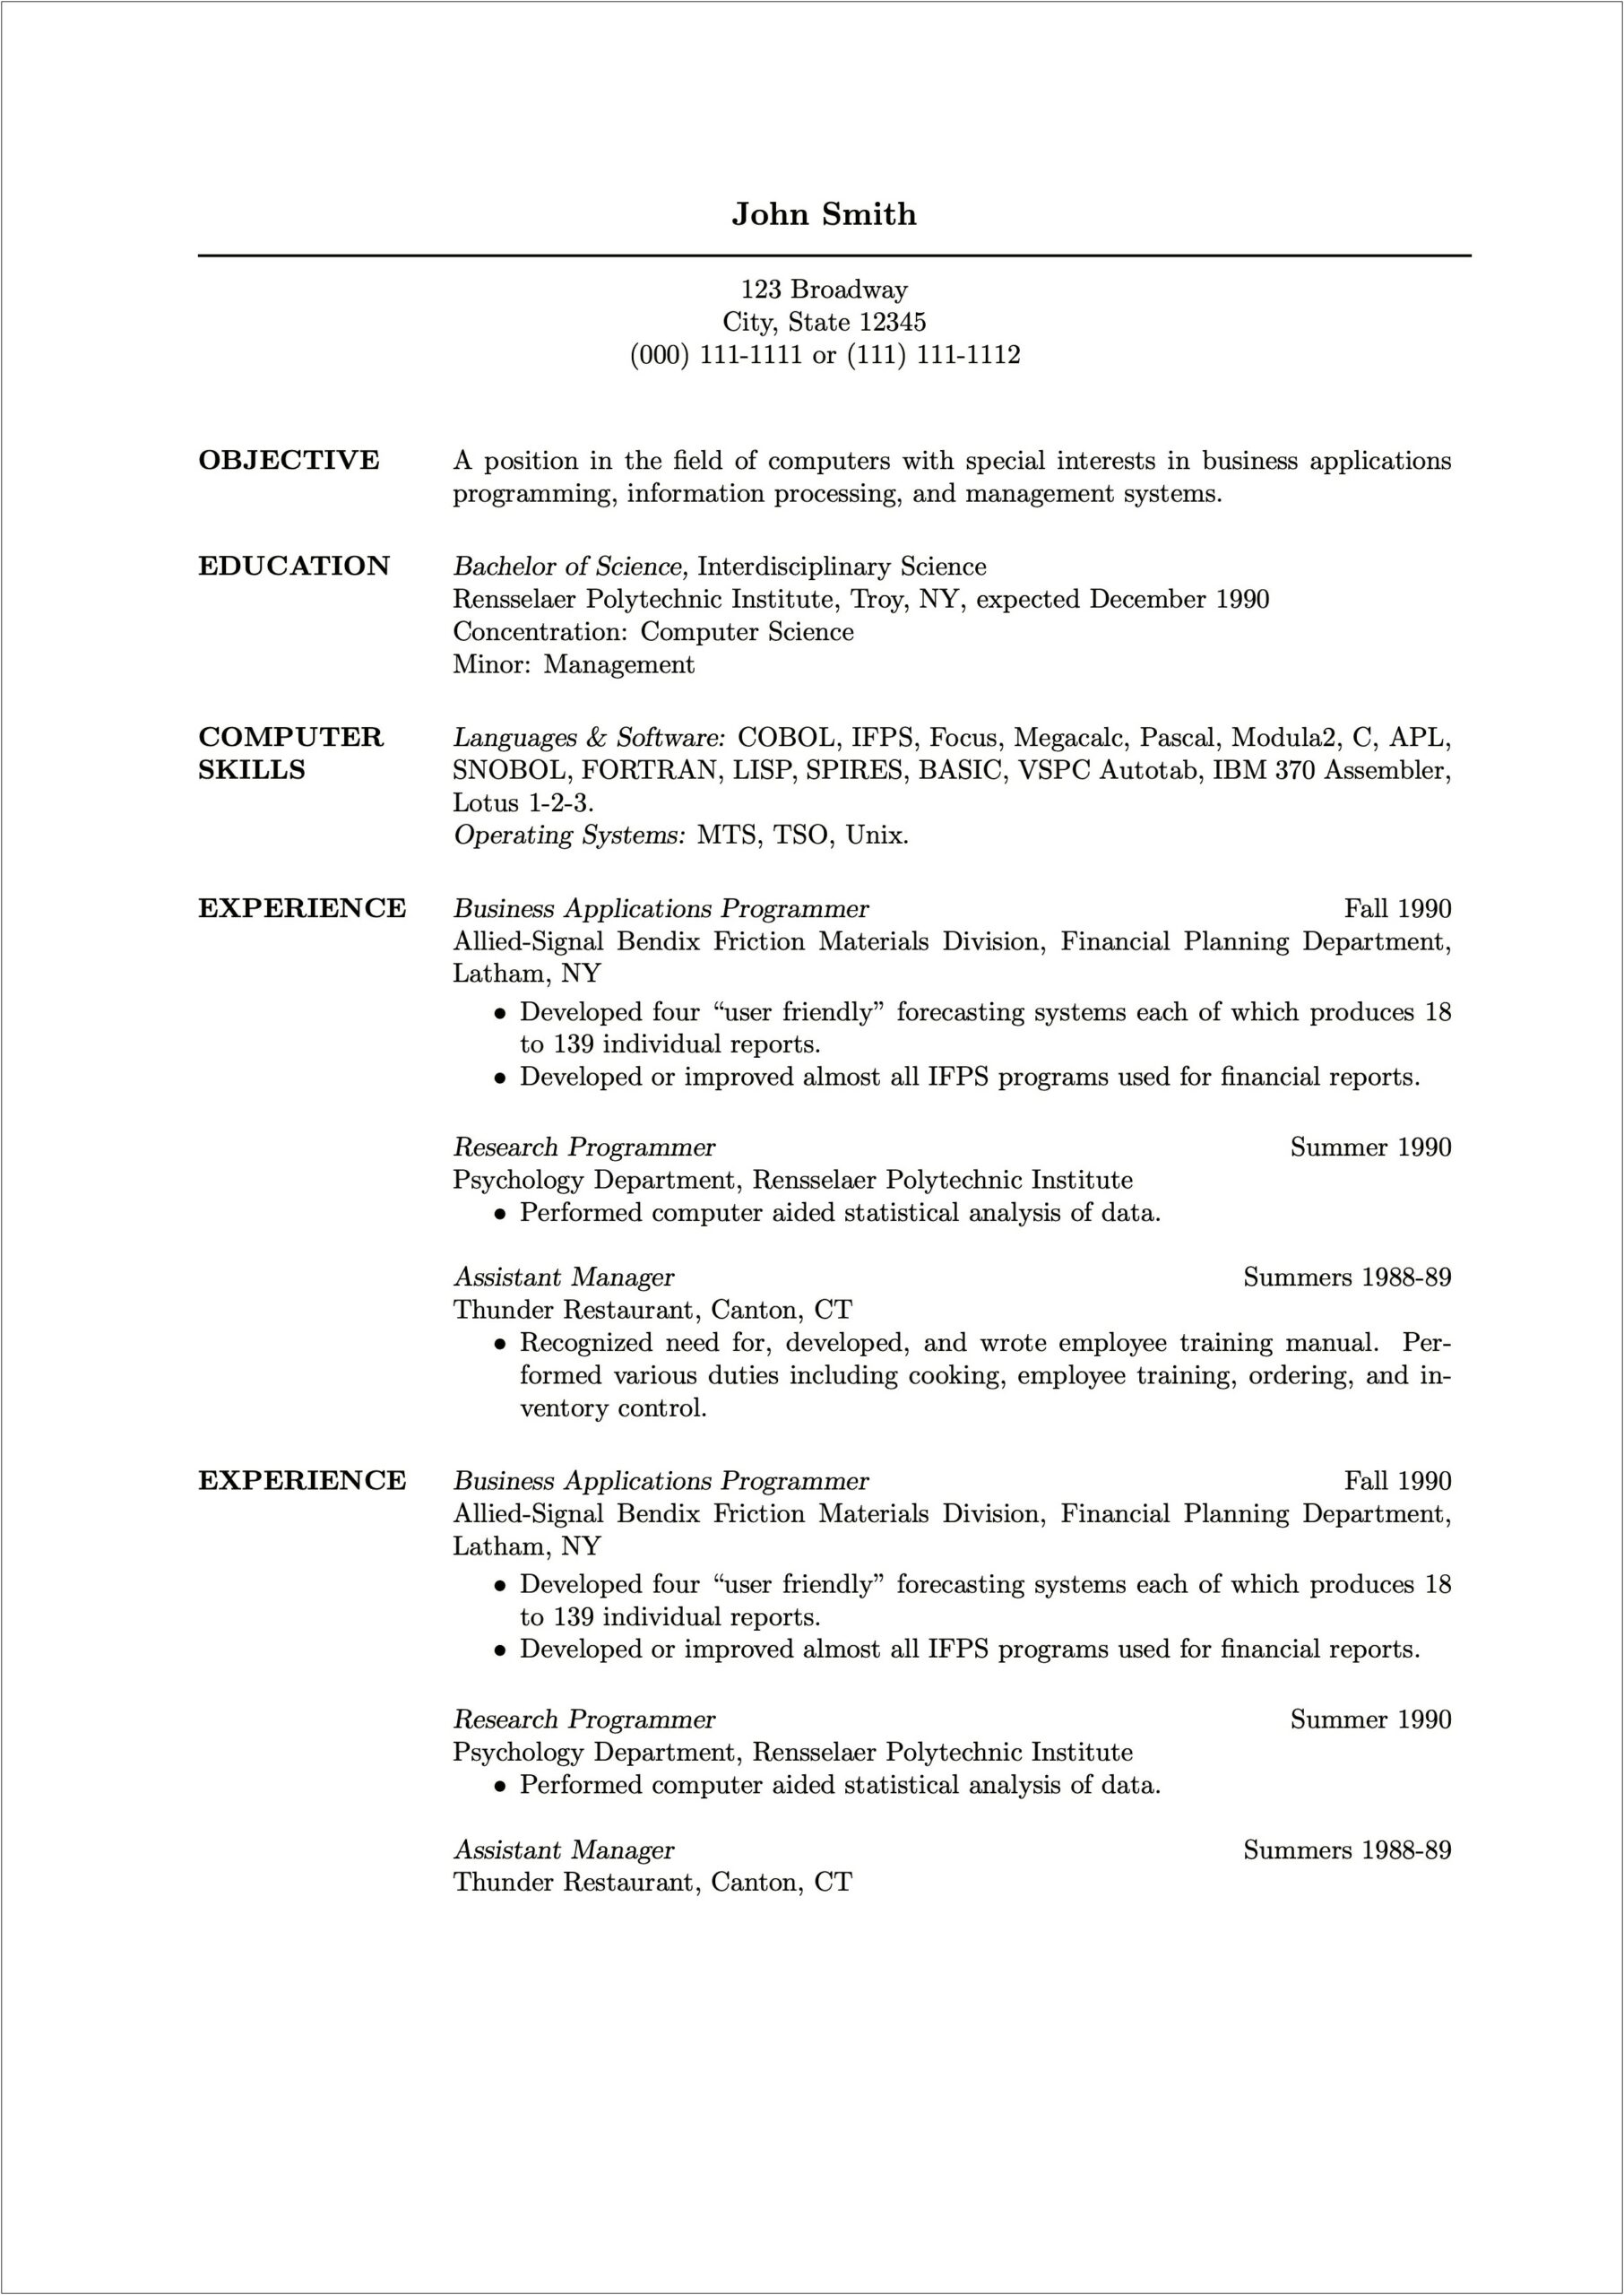 Resume Commerce Graduate With 5 Years Of Experience